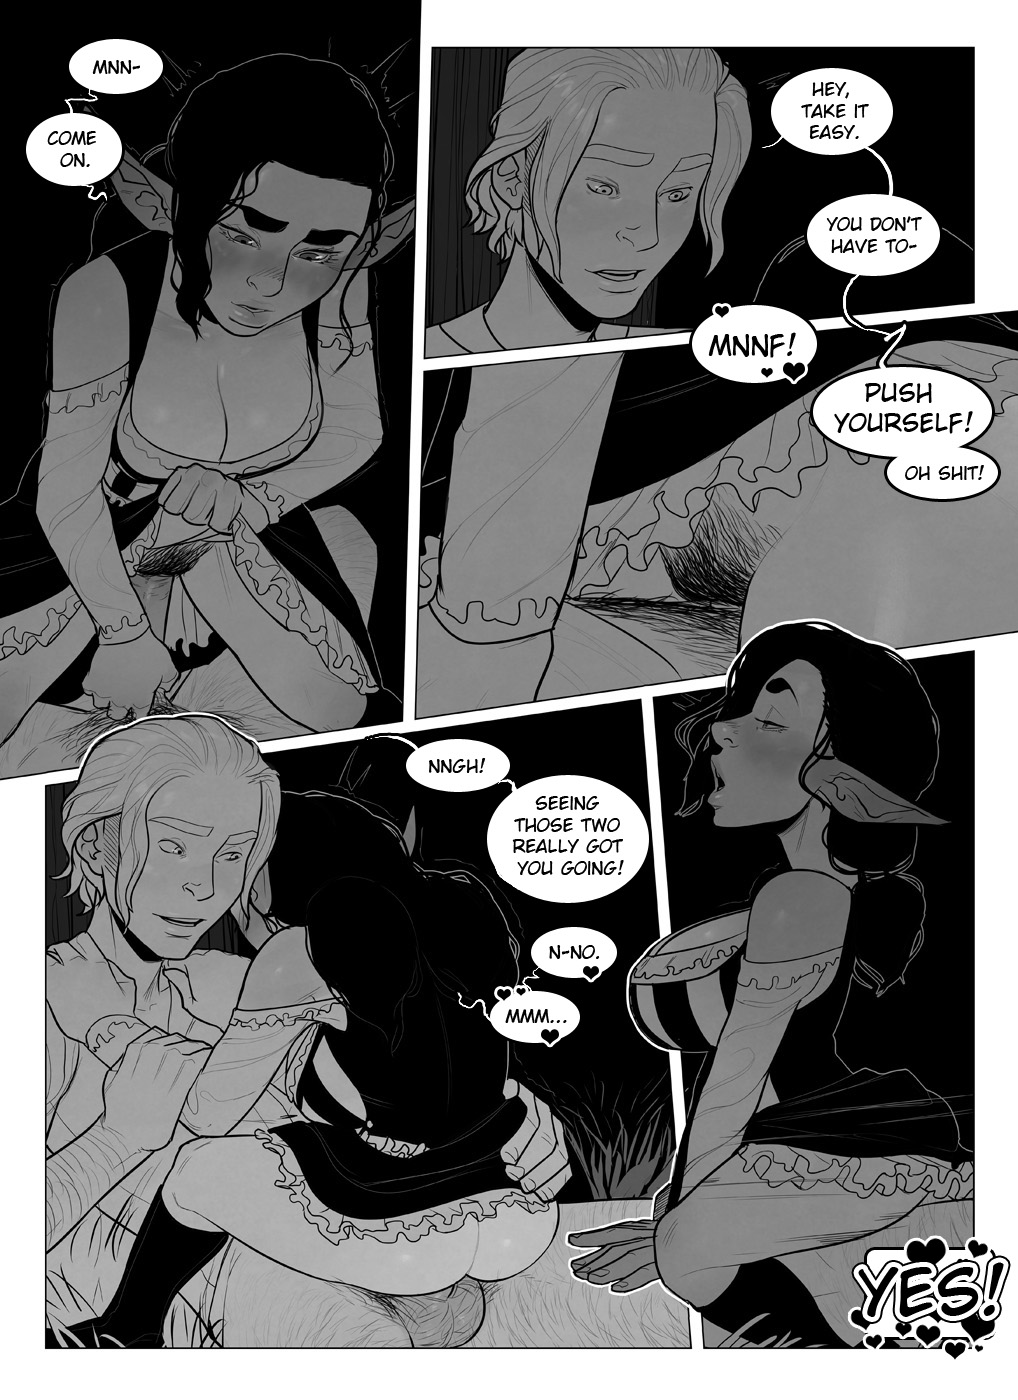 Pictures Showing For Incase Halfling Porn Comic